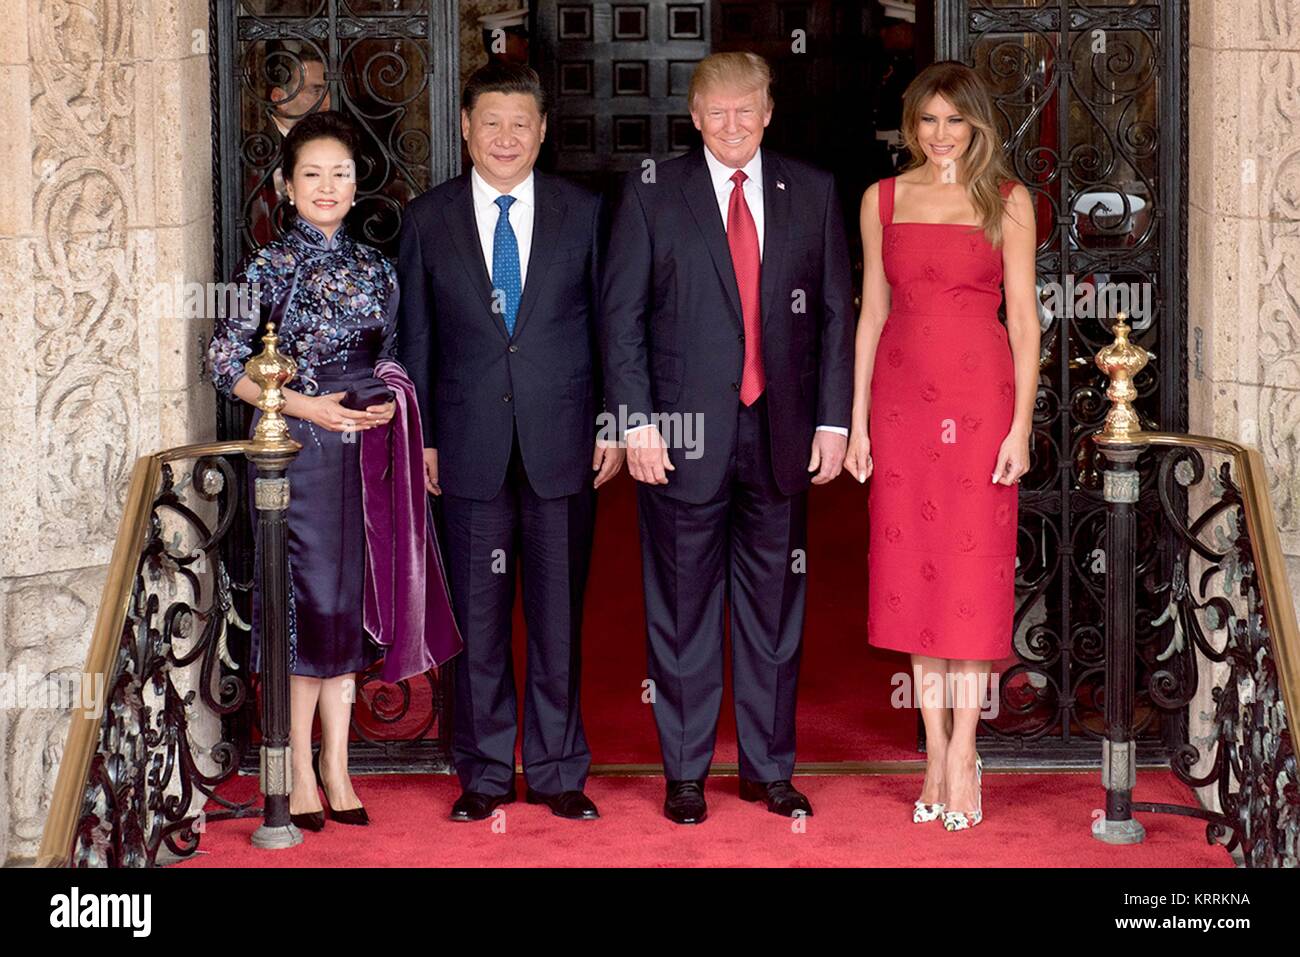 U.S. President Donald Trump and First Lady Melania Trump pose with Chinese President Xi Jingping and his wife Peng Liyuan at Mar-a-Lago April 6, 2017 in Palm Beach, Florida. Stock Photo